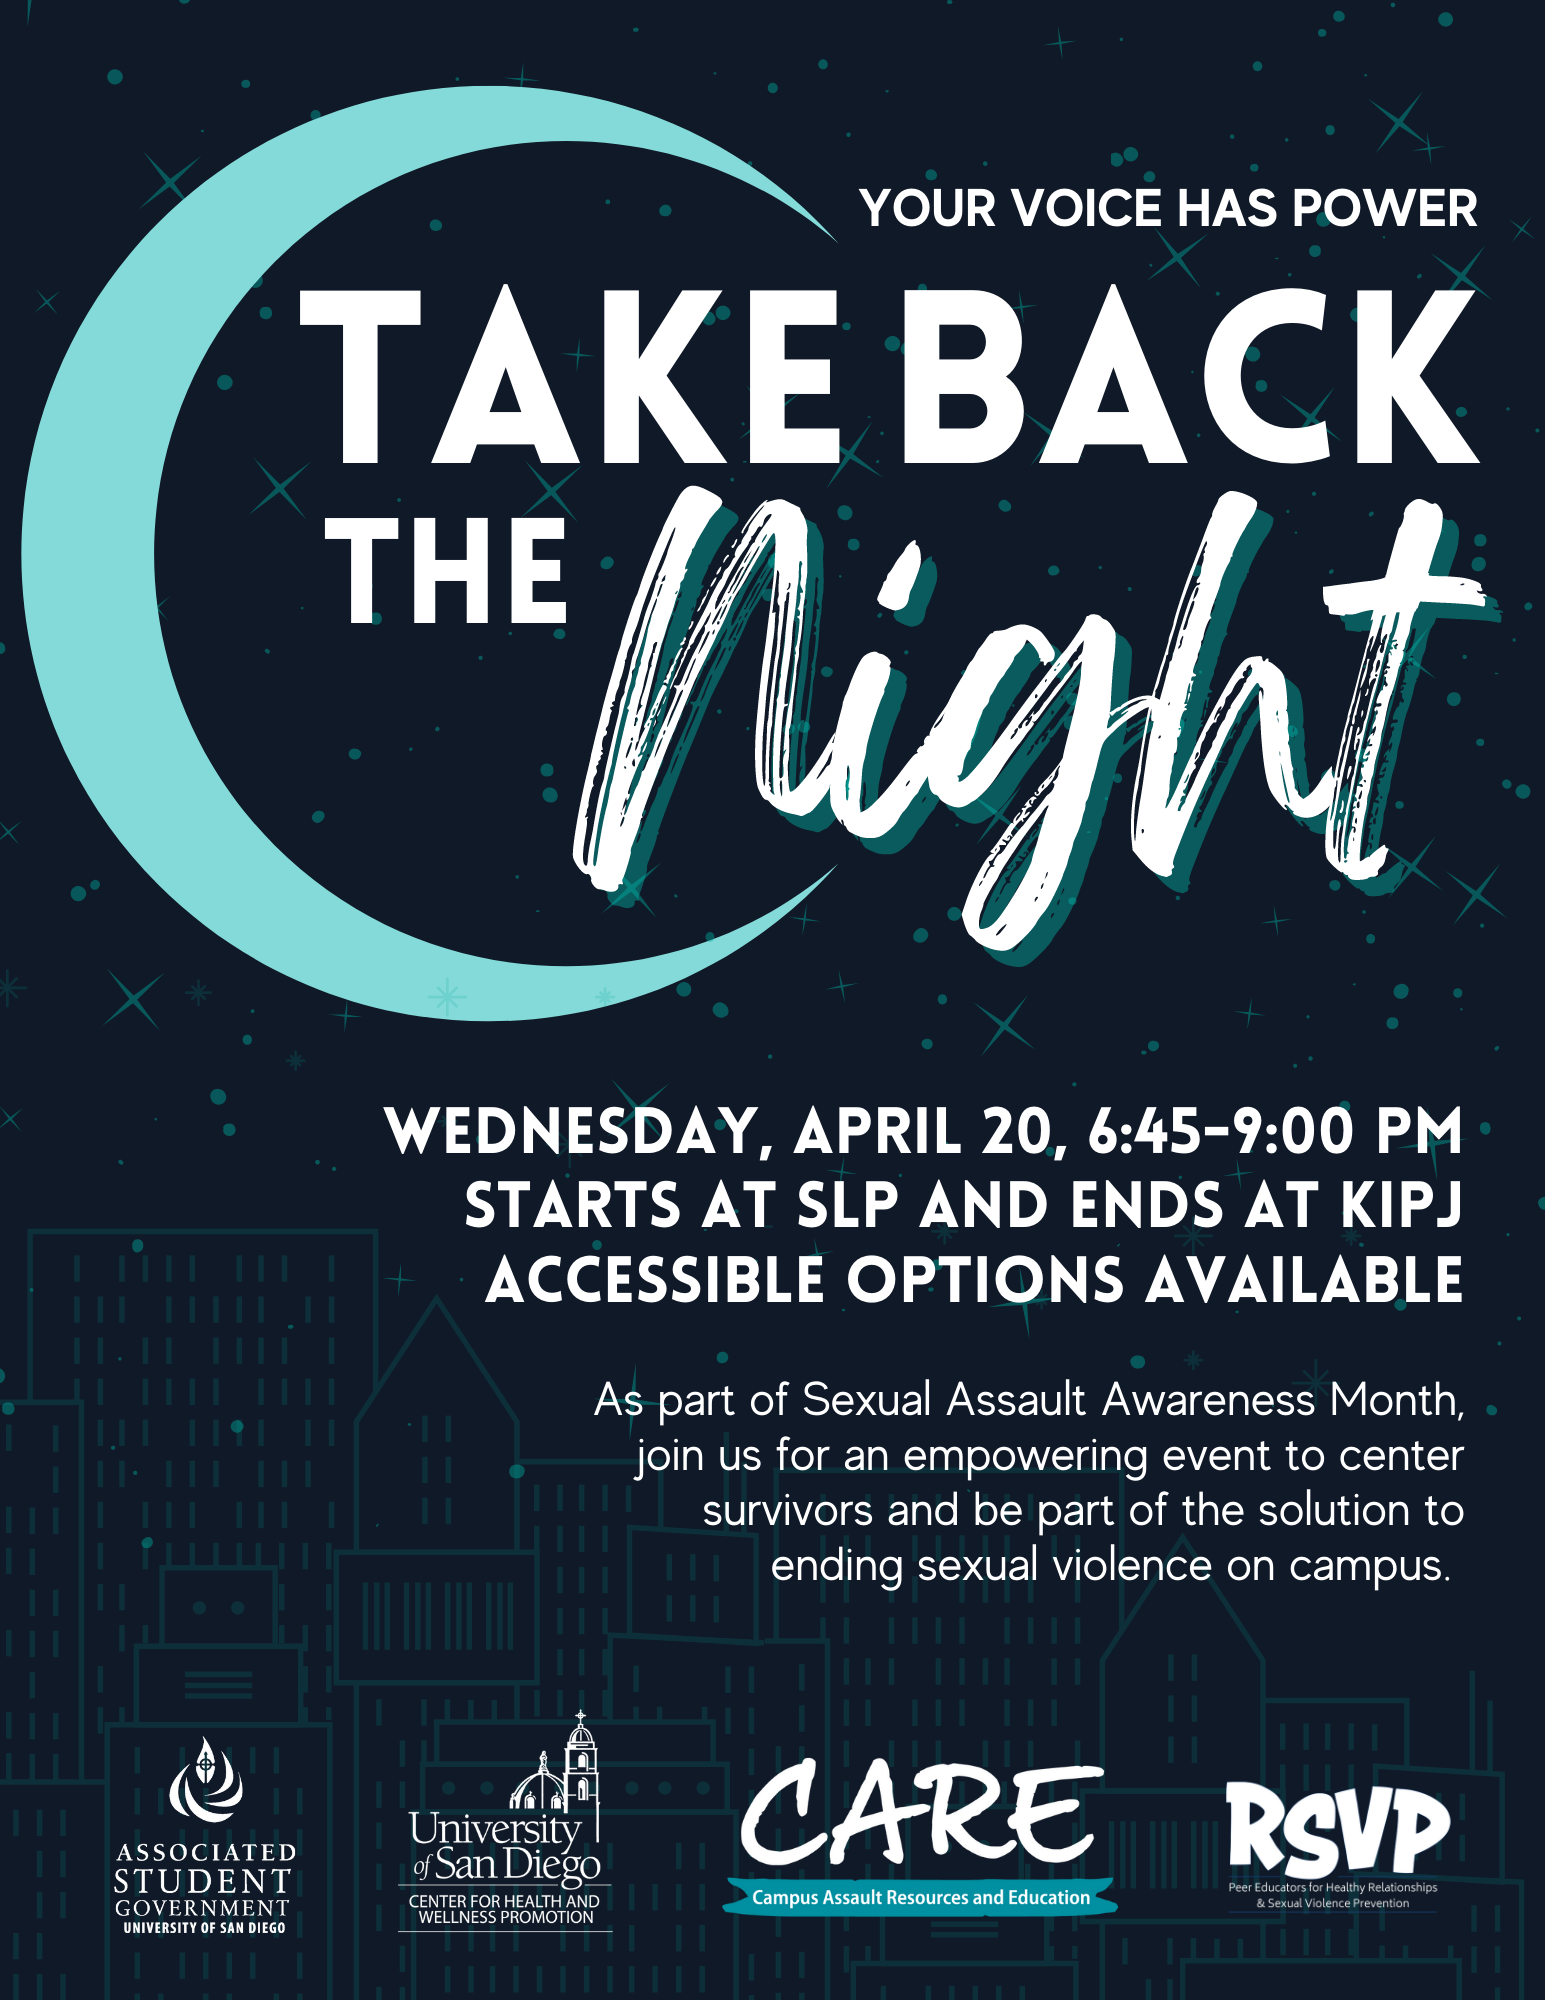 A dark blue image with a moon and the following information: Take Back the Night; Your Voice Has Power. Wednesday, April 6th, 6:45-9 PM, start at SLP and ends at KIPJ. Accessible options available. As